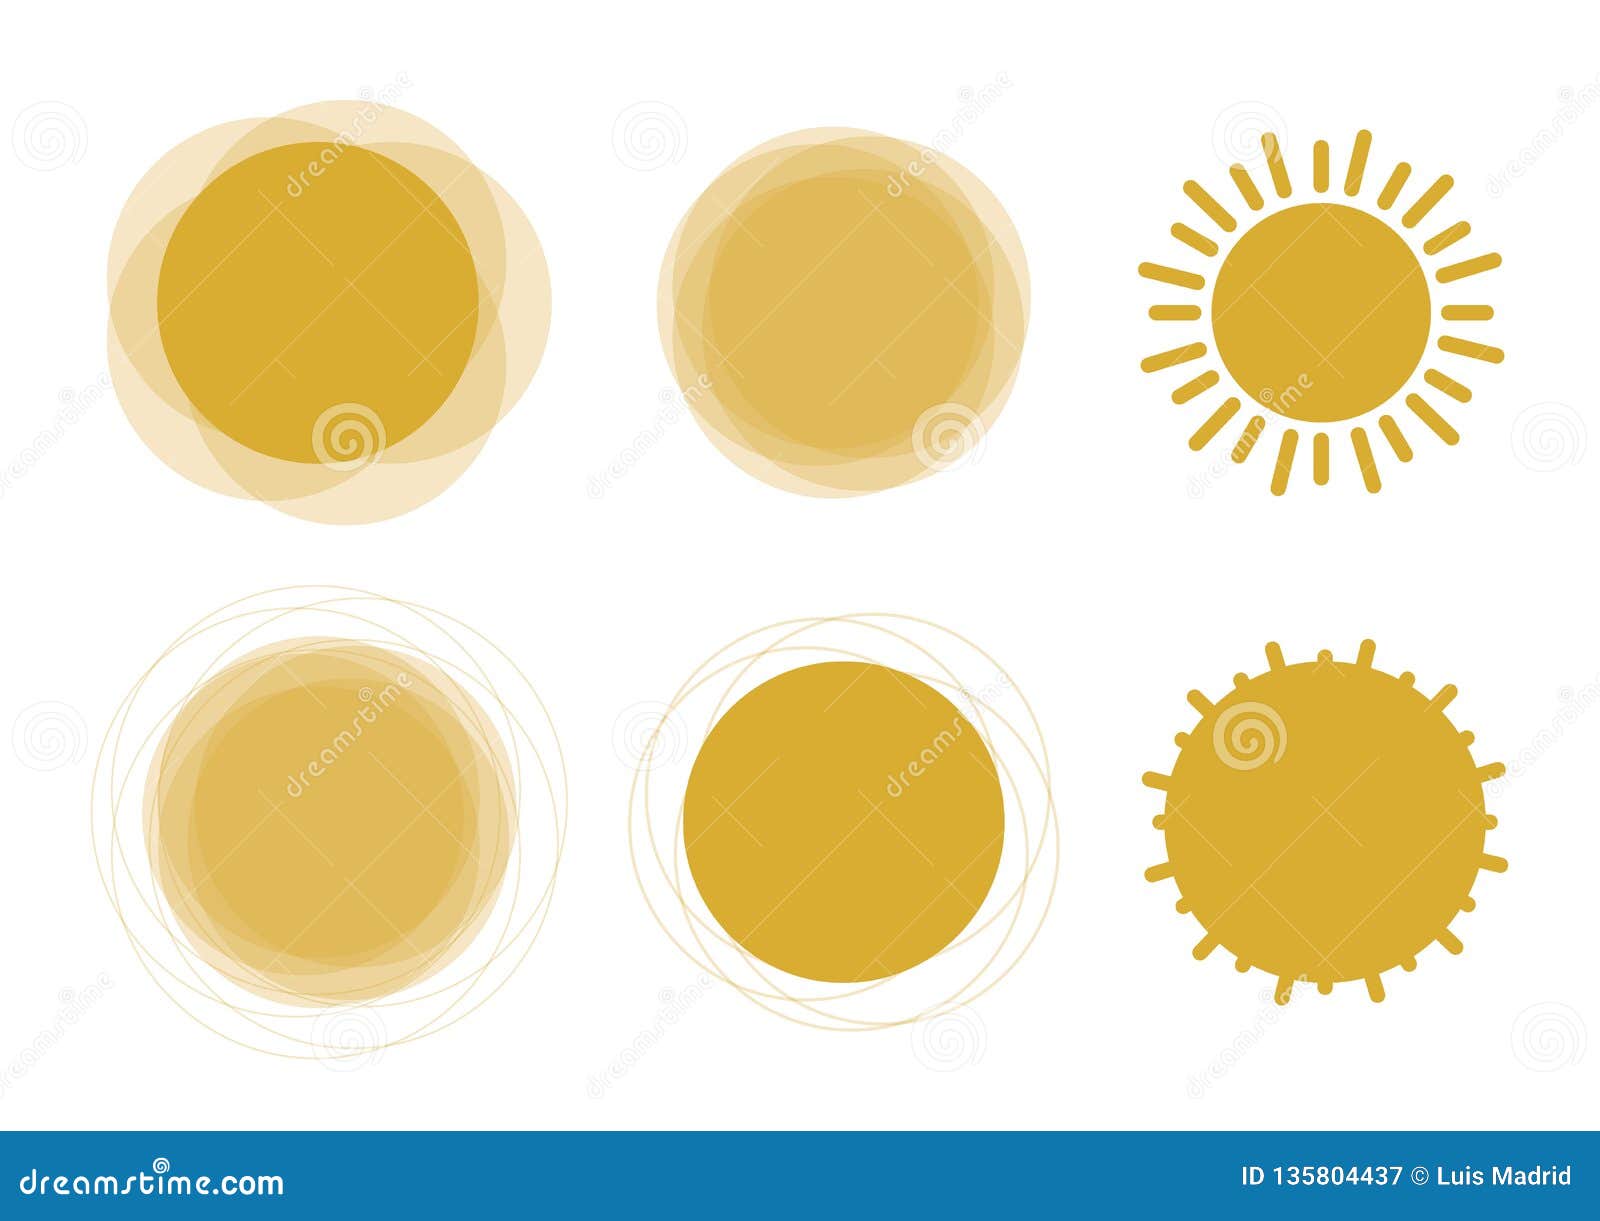 set of six sun images royalty free